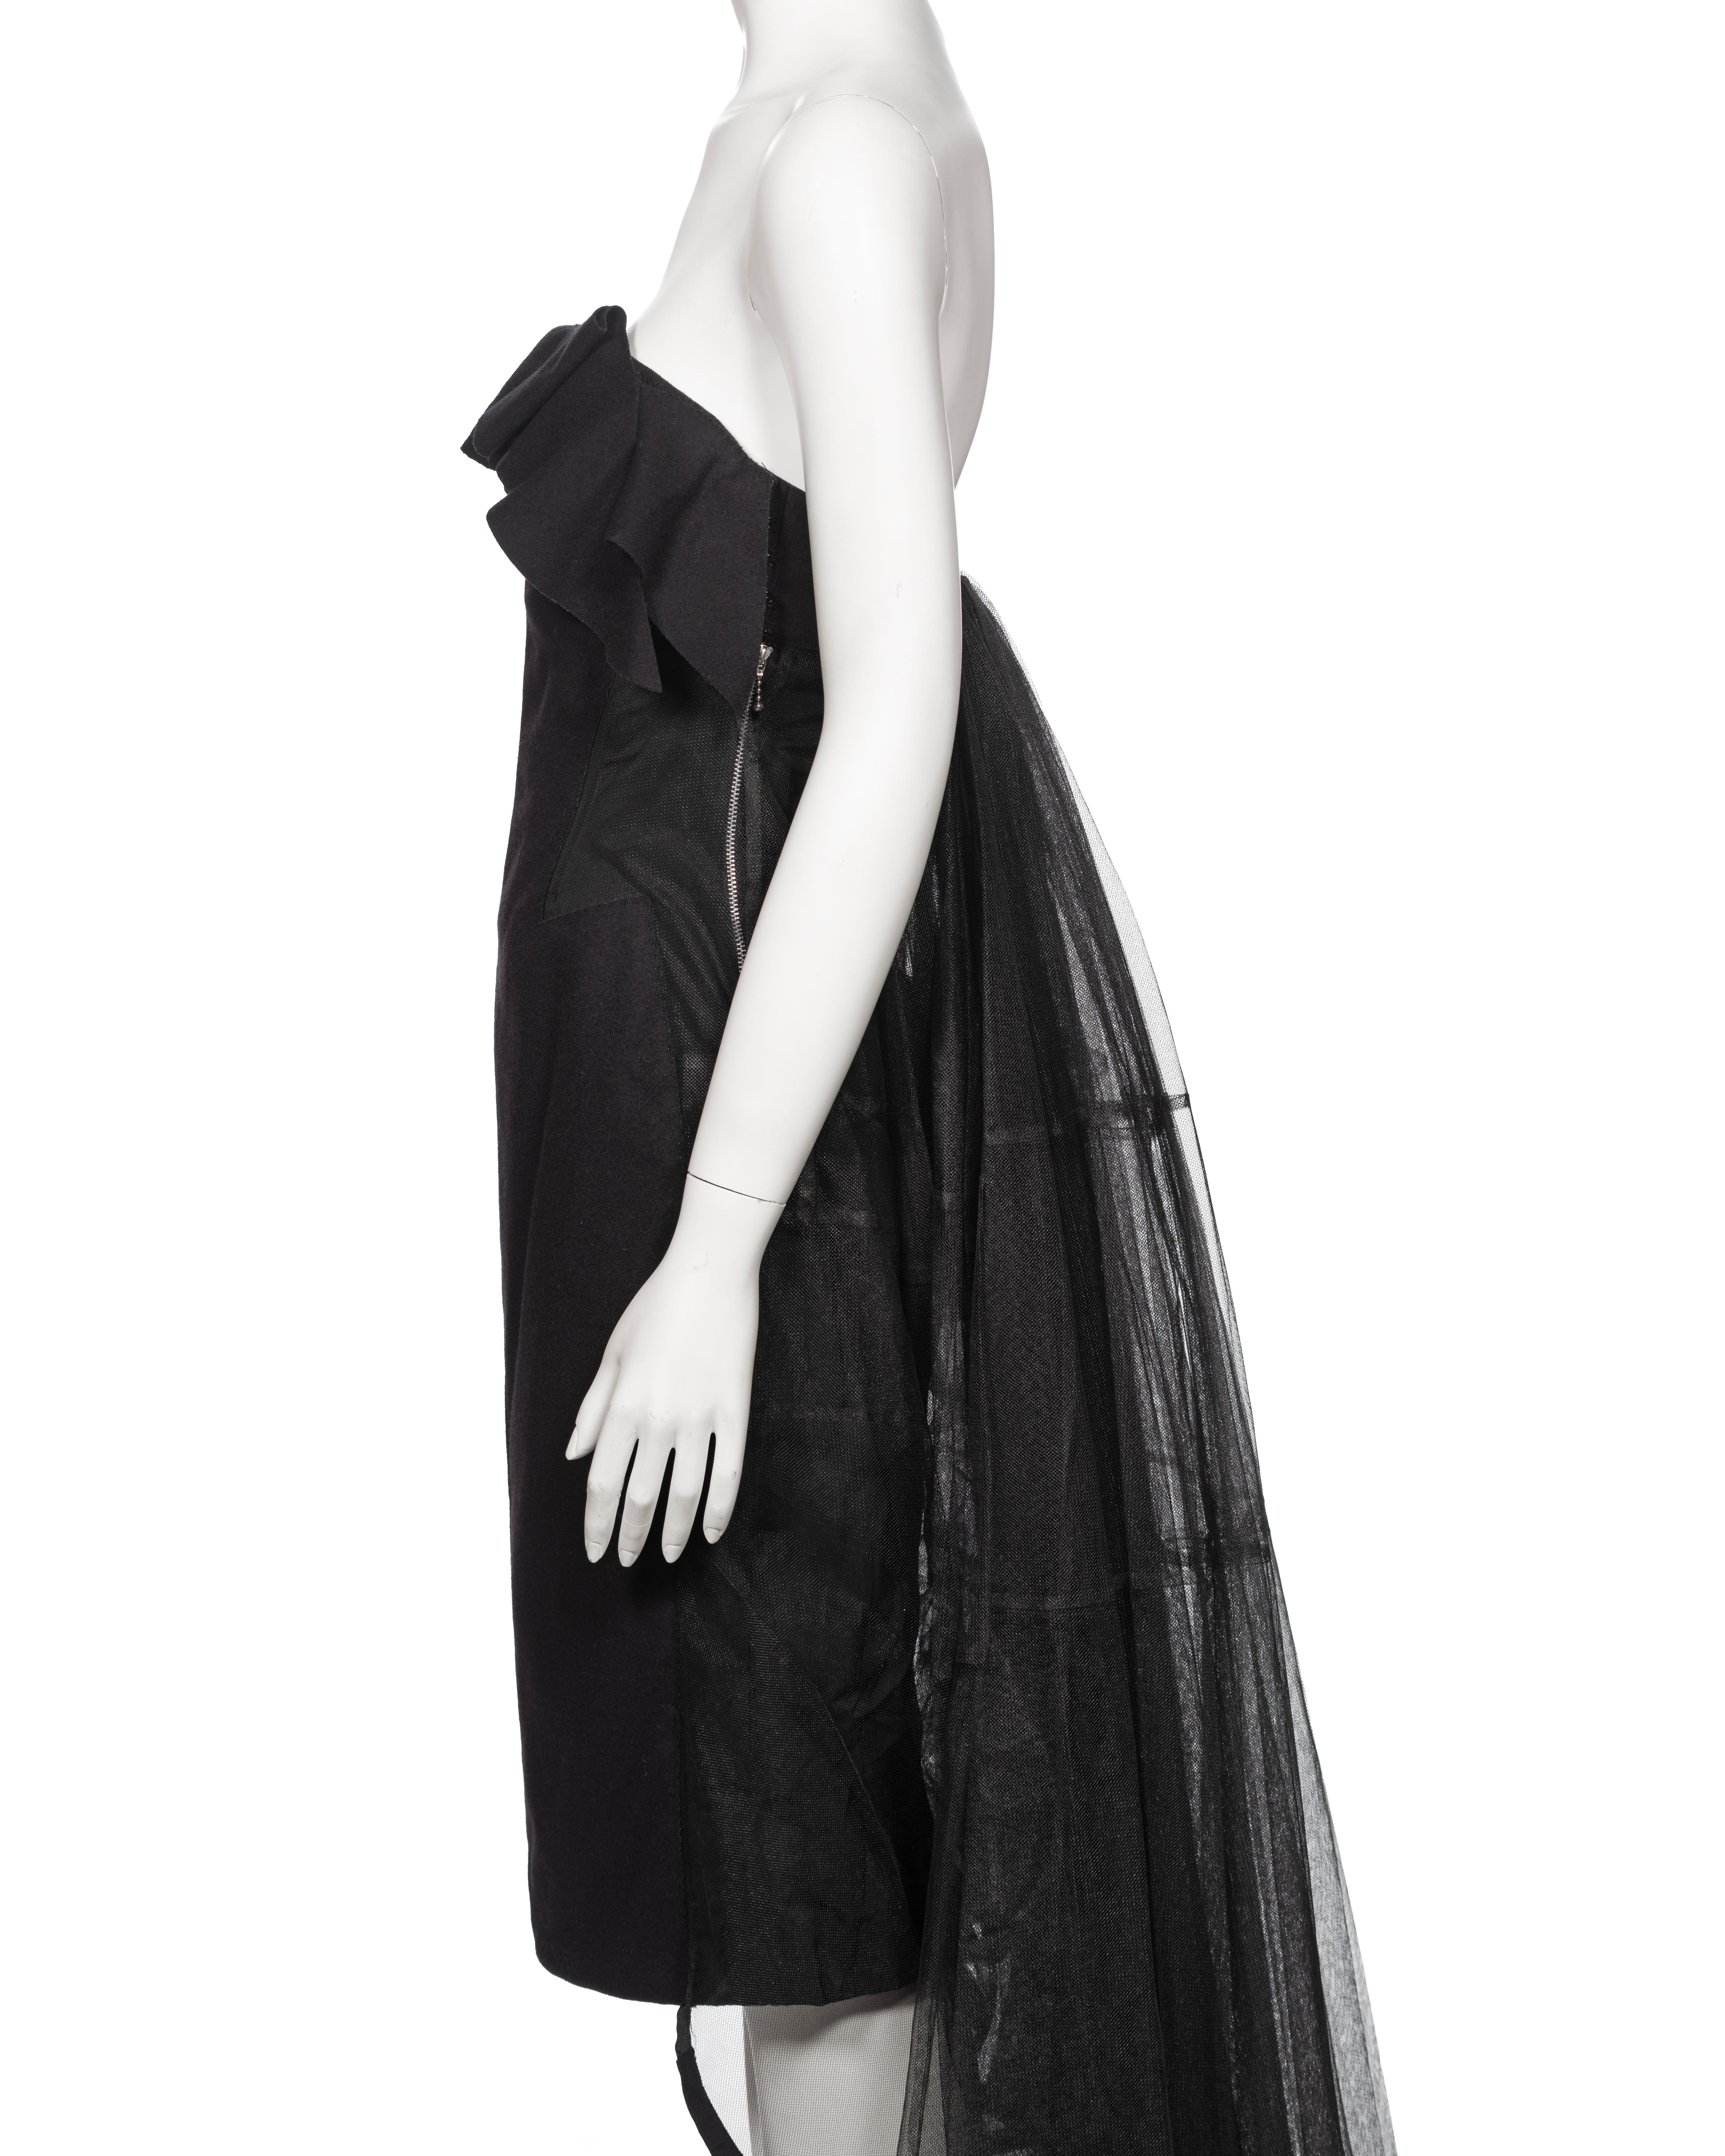 Louis Vuitton by Marc Jacobs Black Wool Strapless Dress with Petticoat, fw 2008 For Sale 5